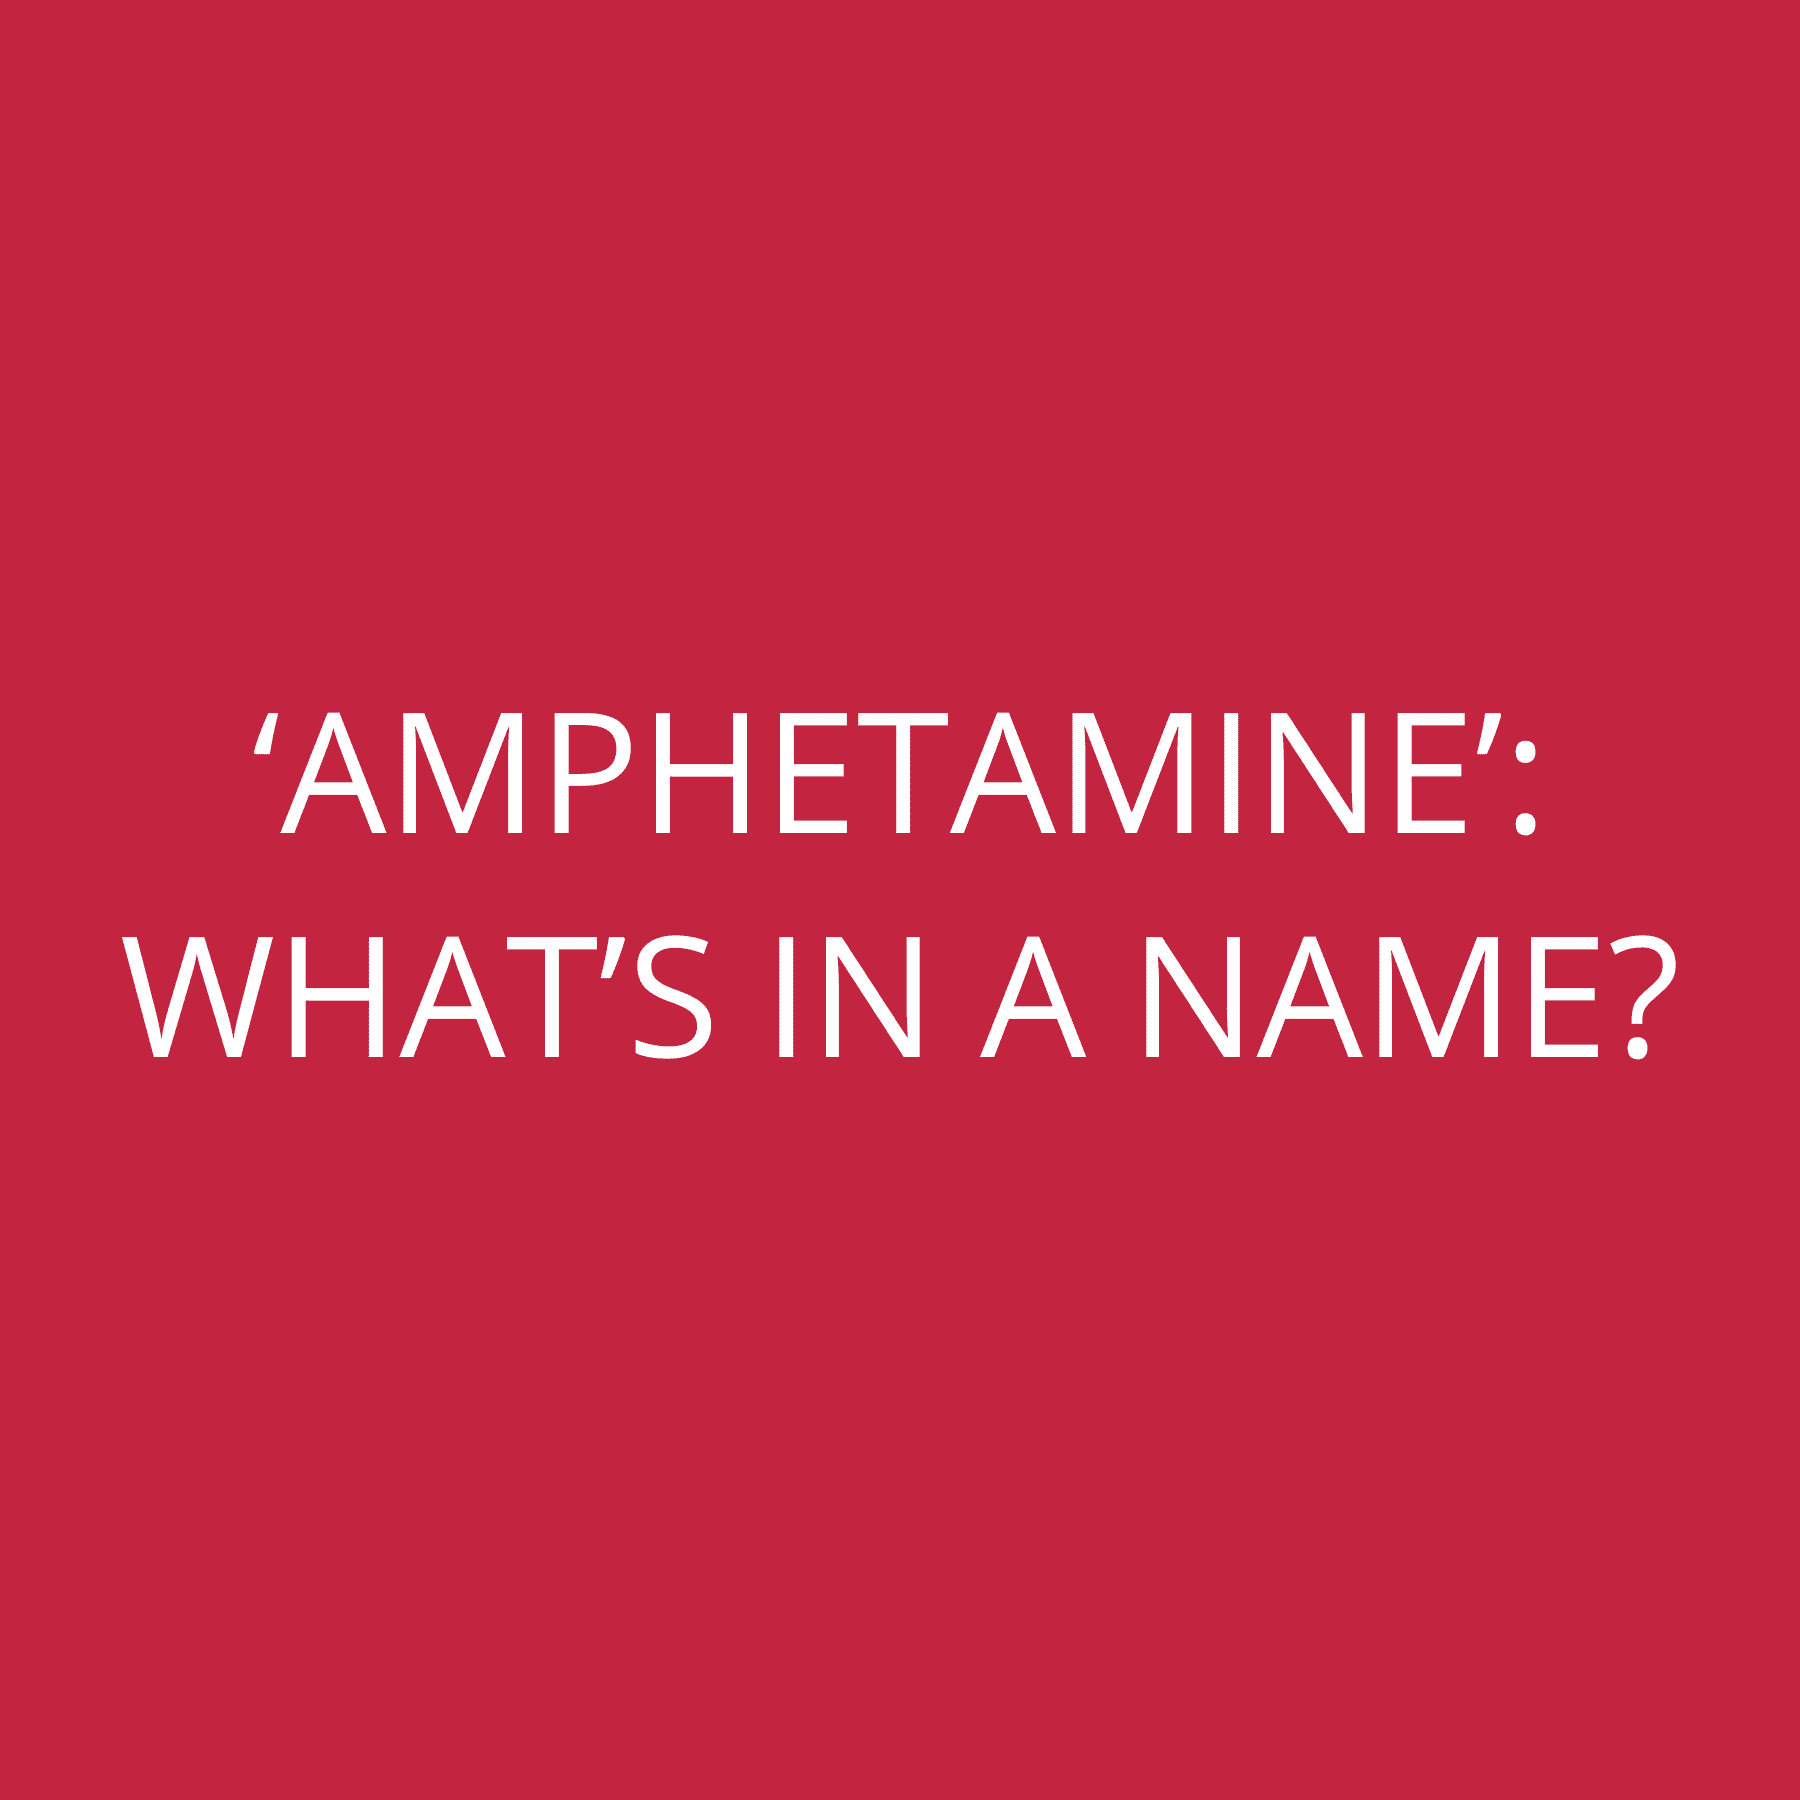 ‘Amphetamine’: What’s in a name?